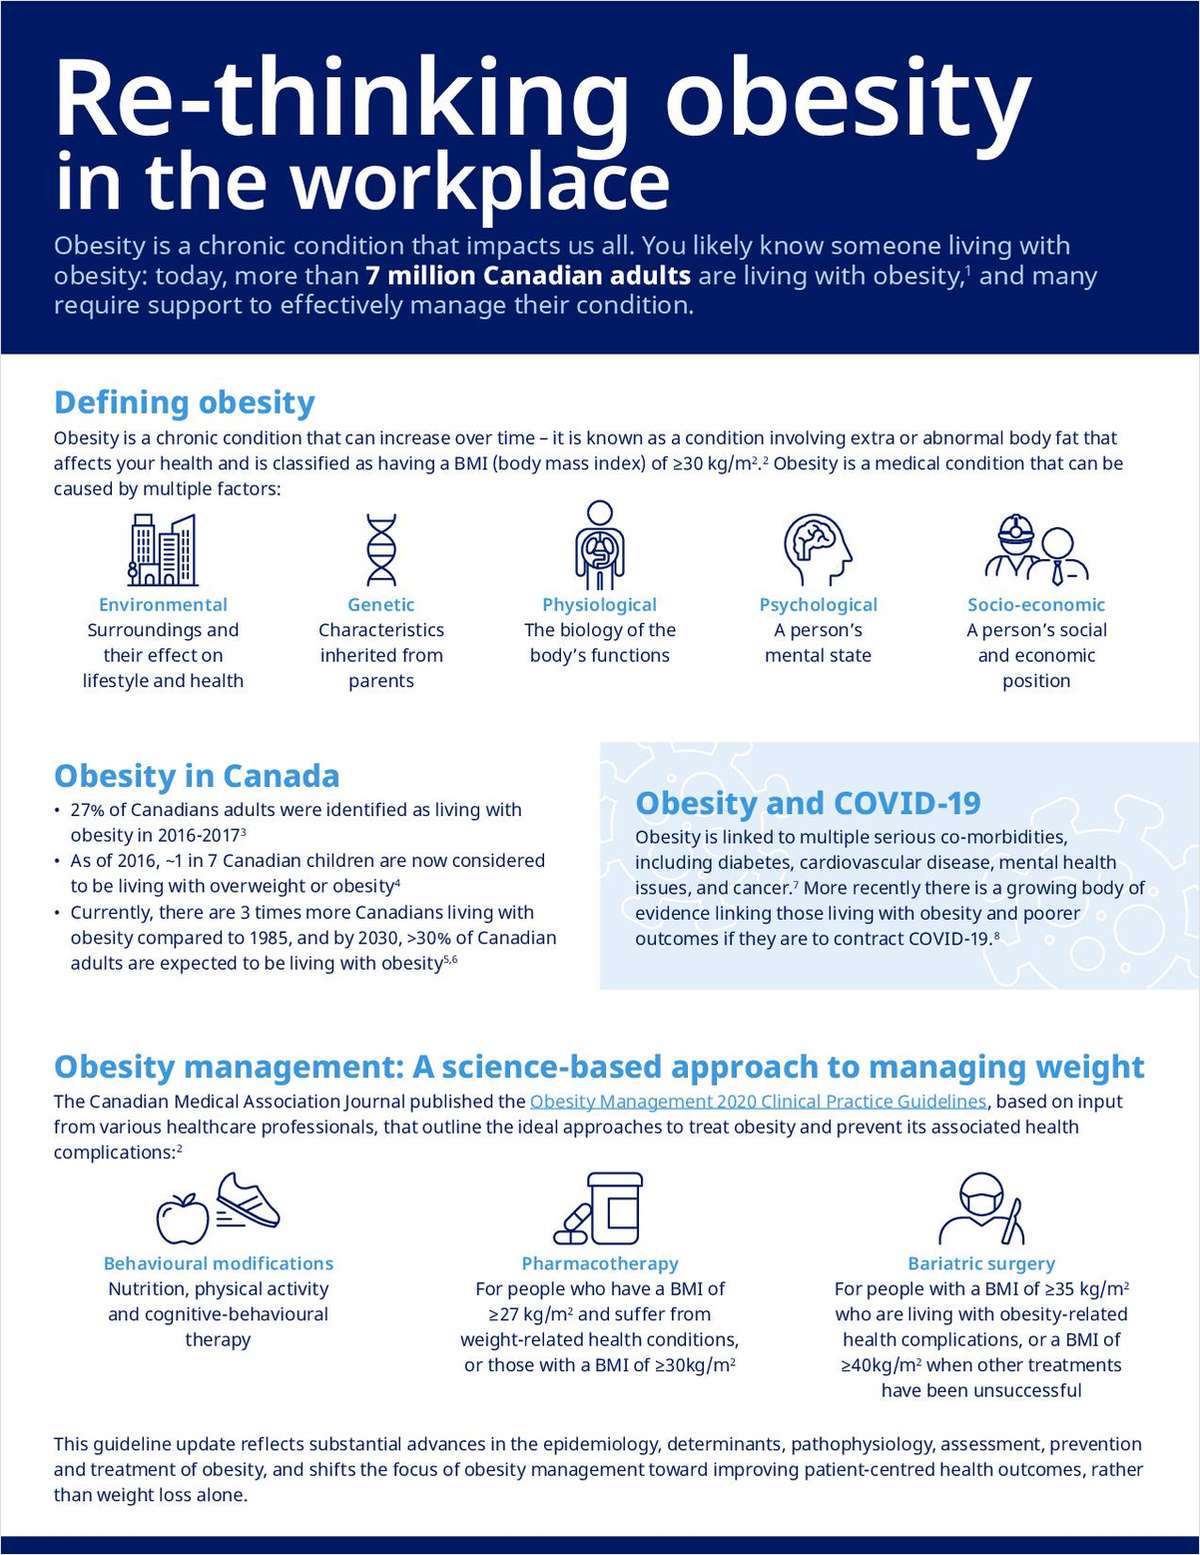 Re-thinking obesity in the workplace